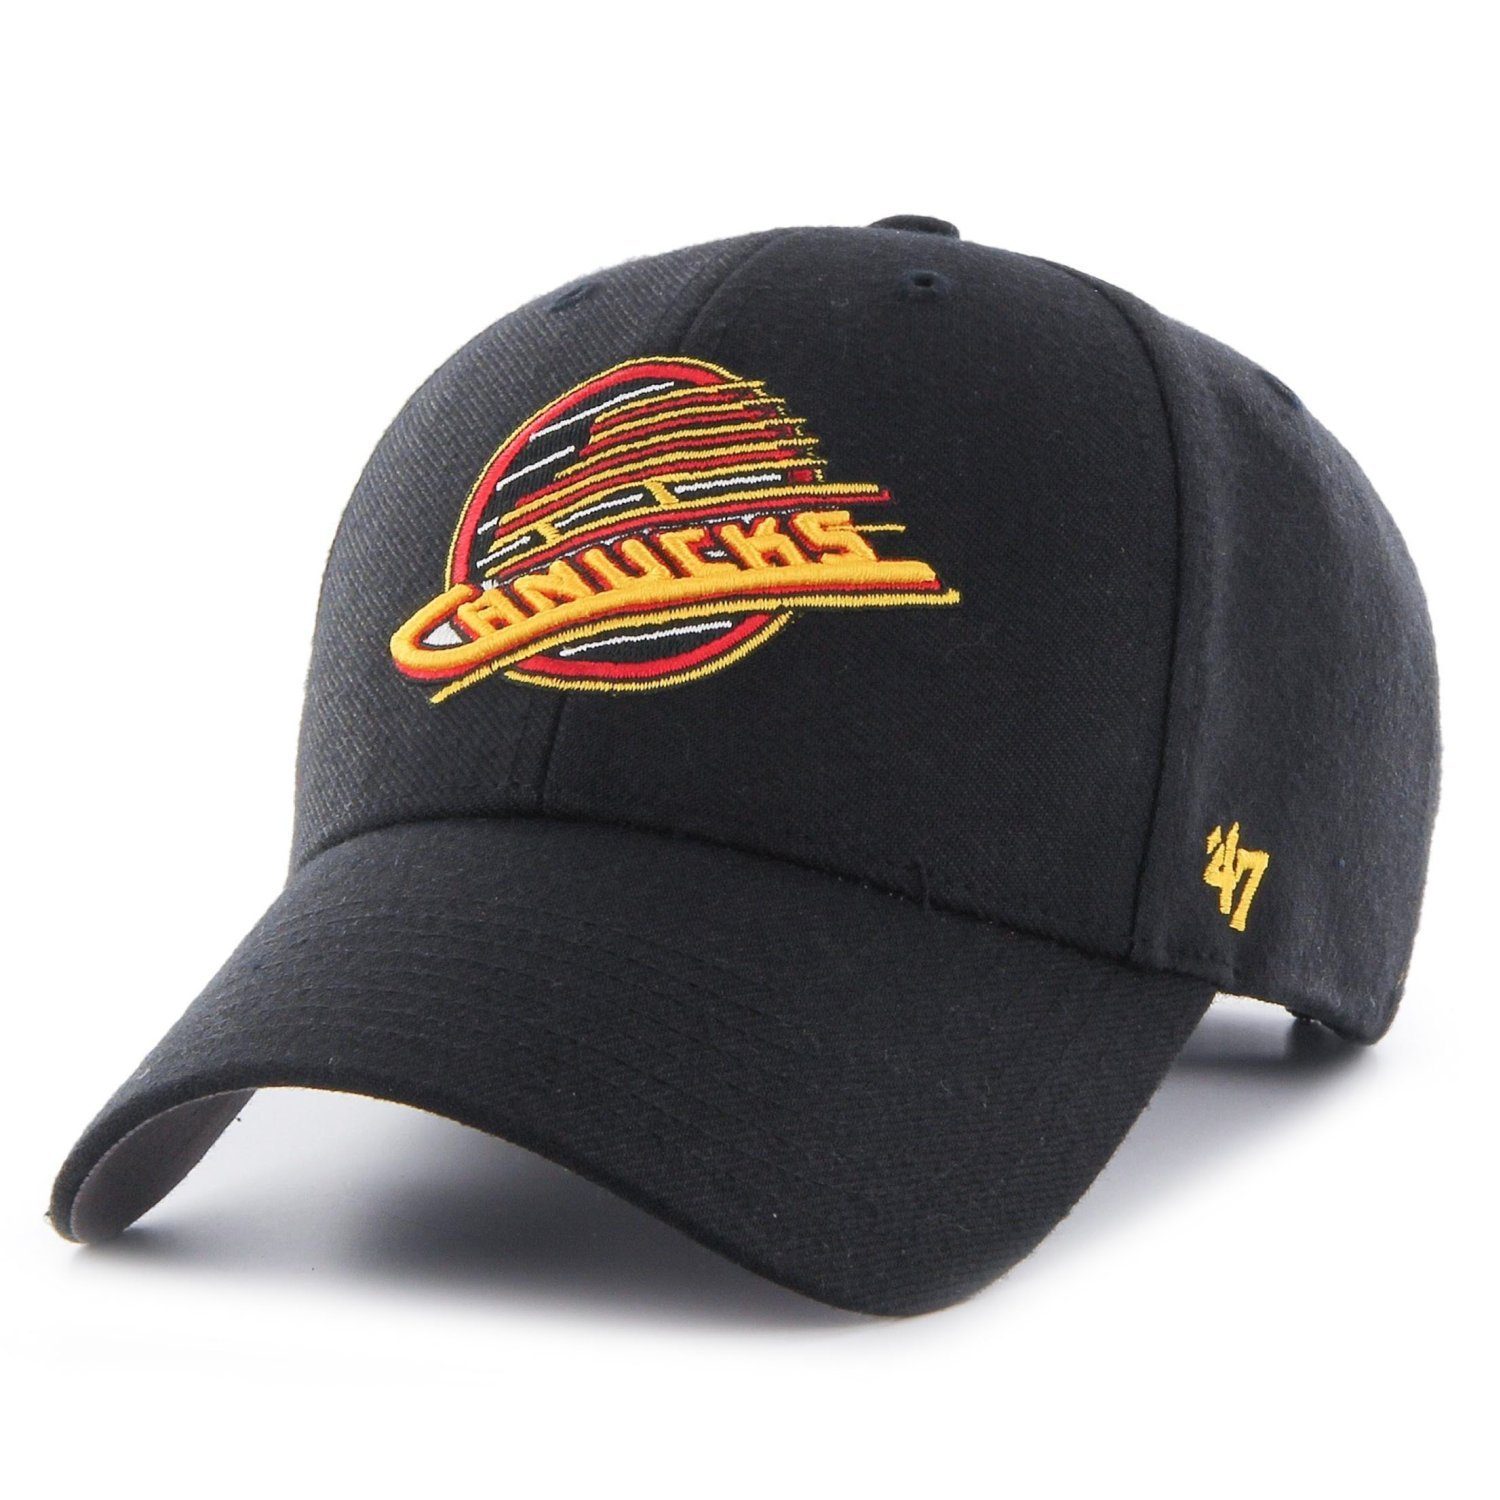 '47 Brand Trucker Cap Relaxed Fit NHL Vancouver Canucks